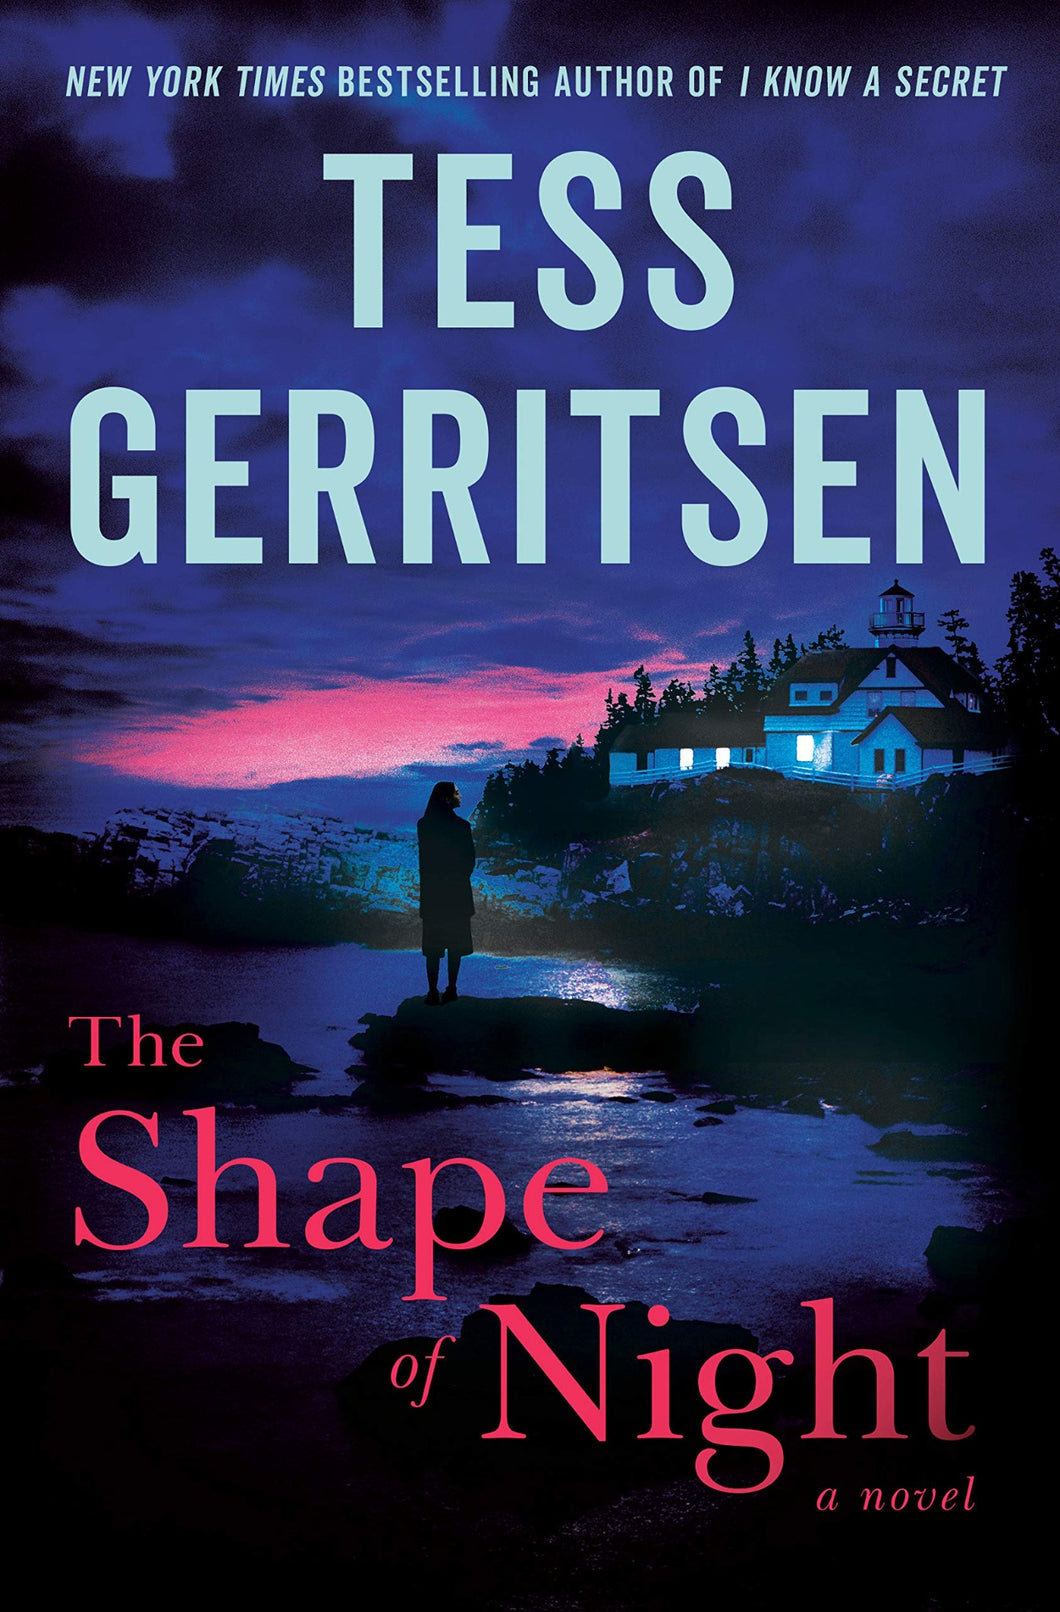 The Shape of Night : A Novel by Tess Gerritsen (2019, Hardcover)